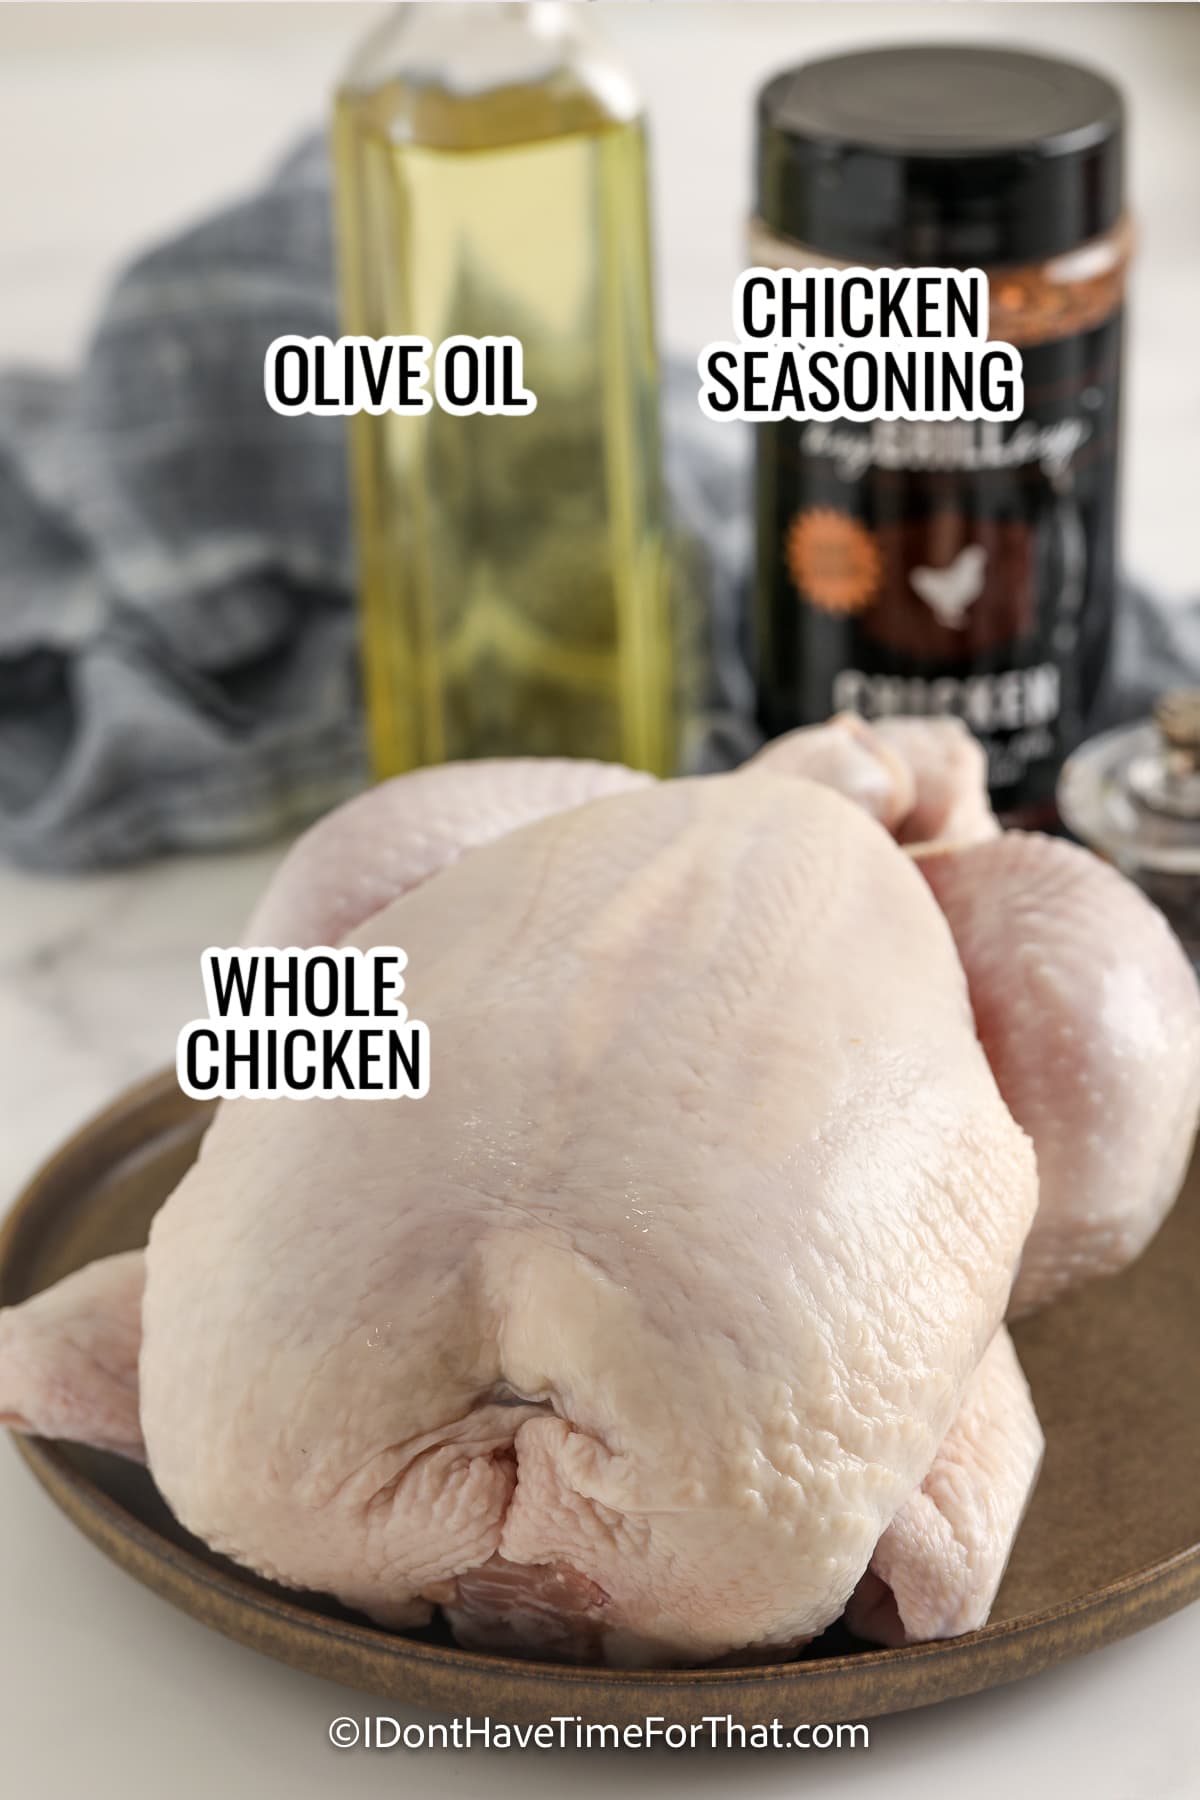 olive oil, chicken seasoning, and a whole chicken to make air fryer whole chicken